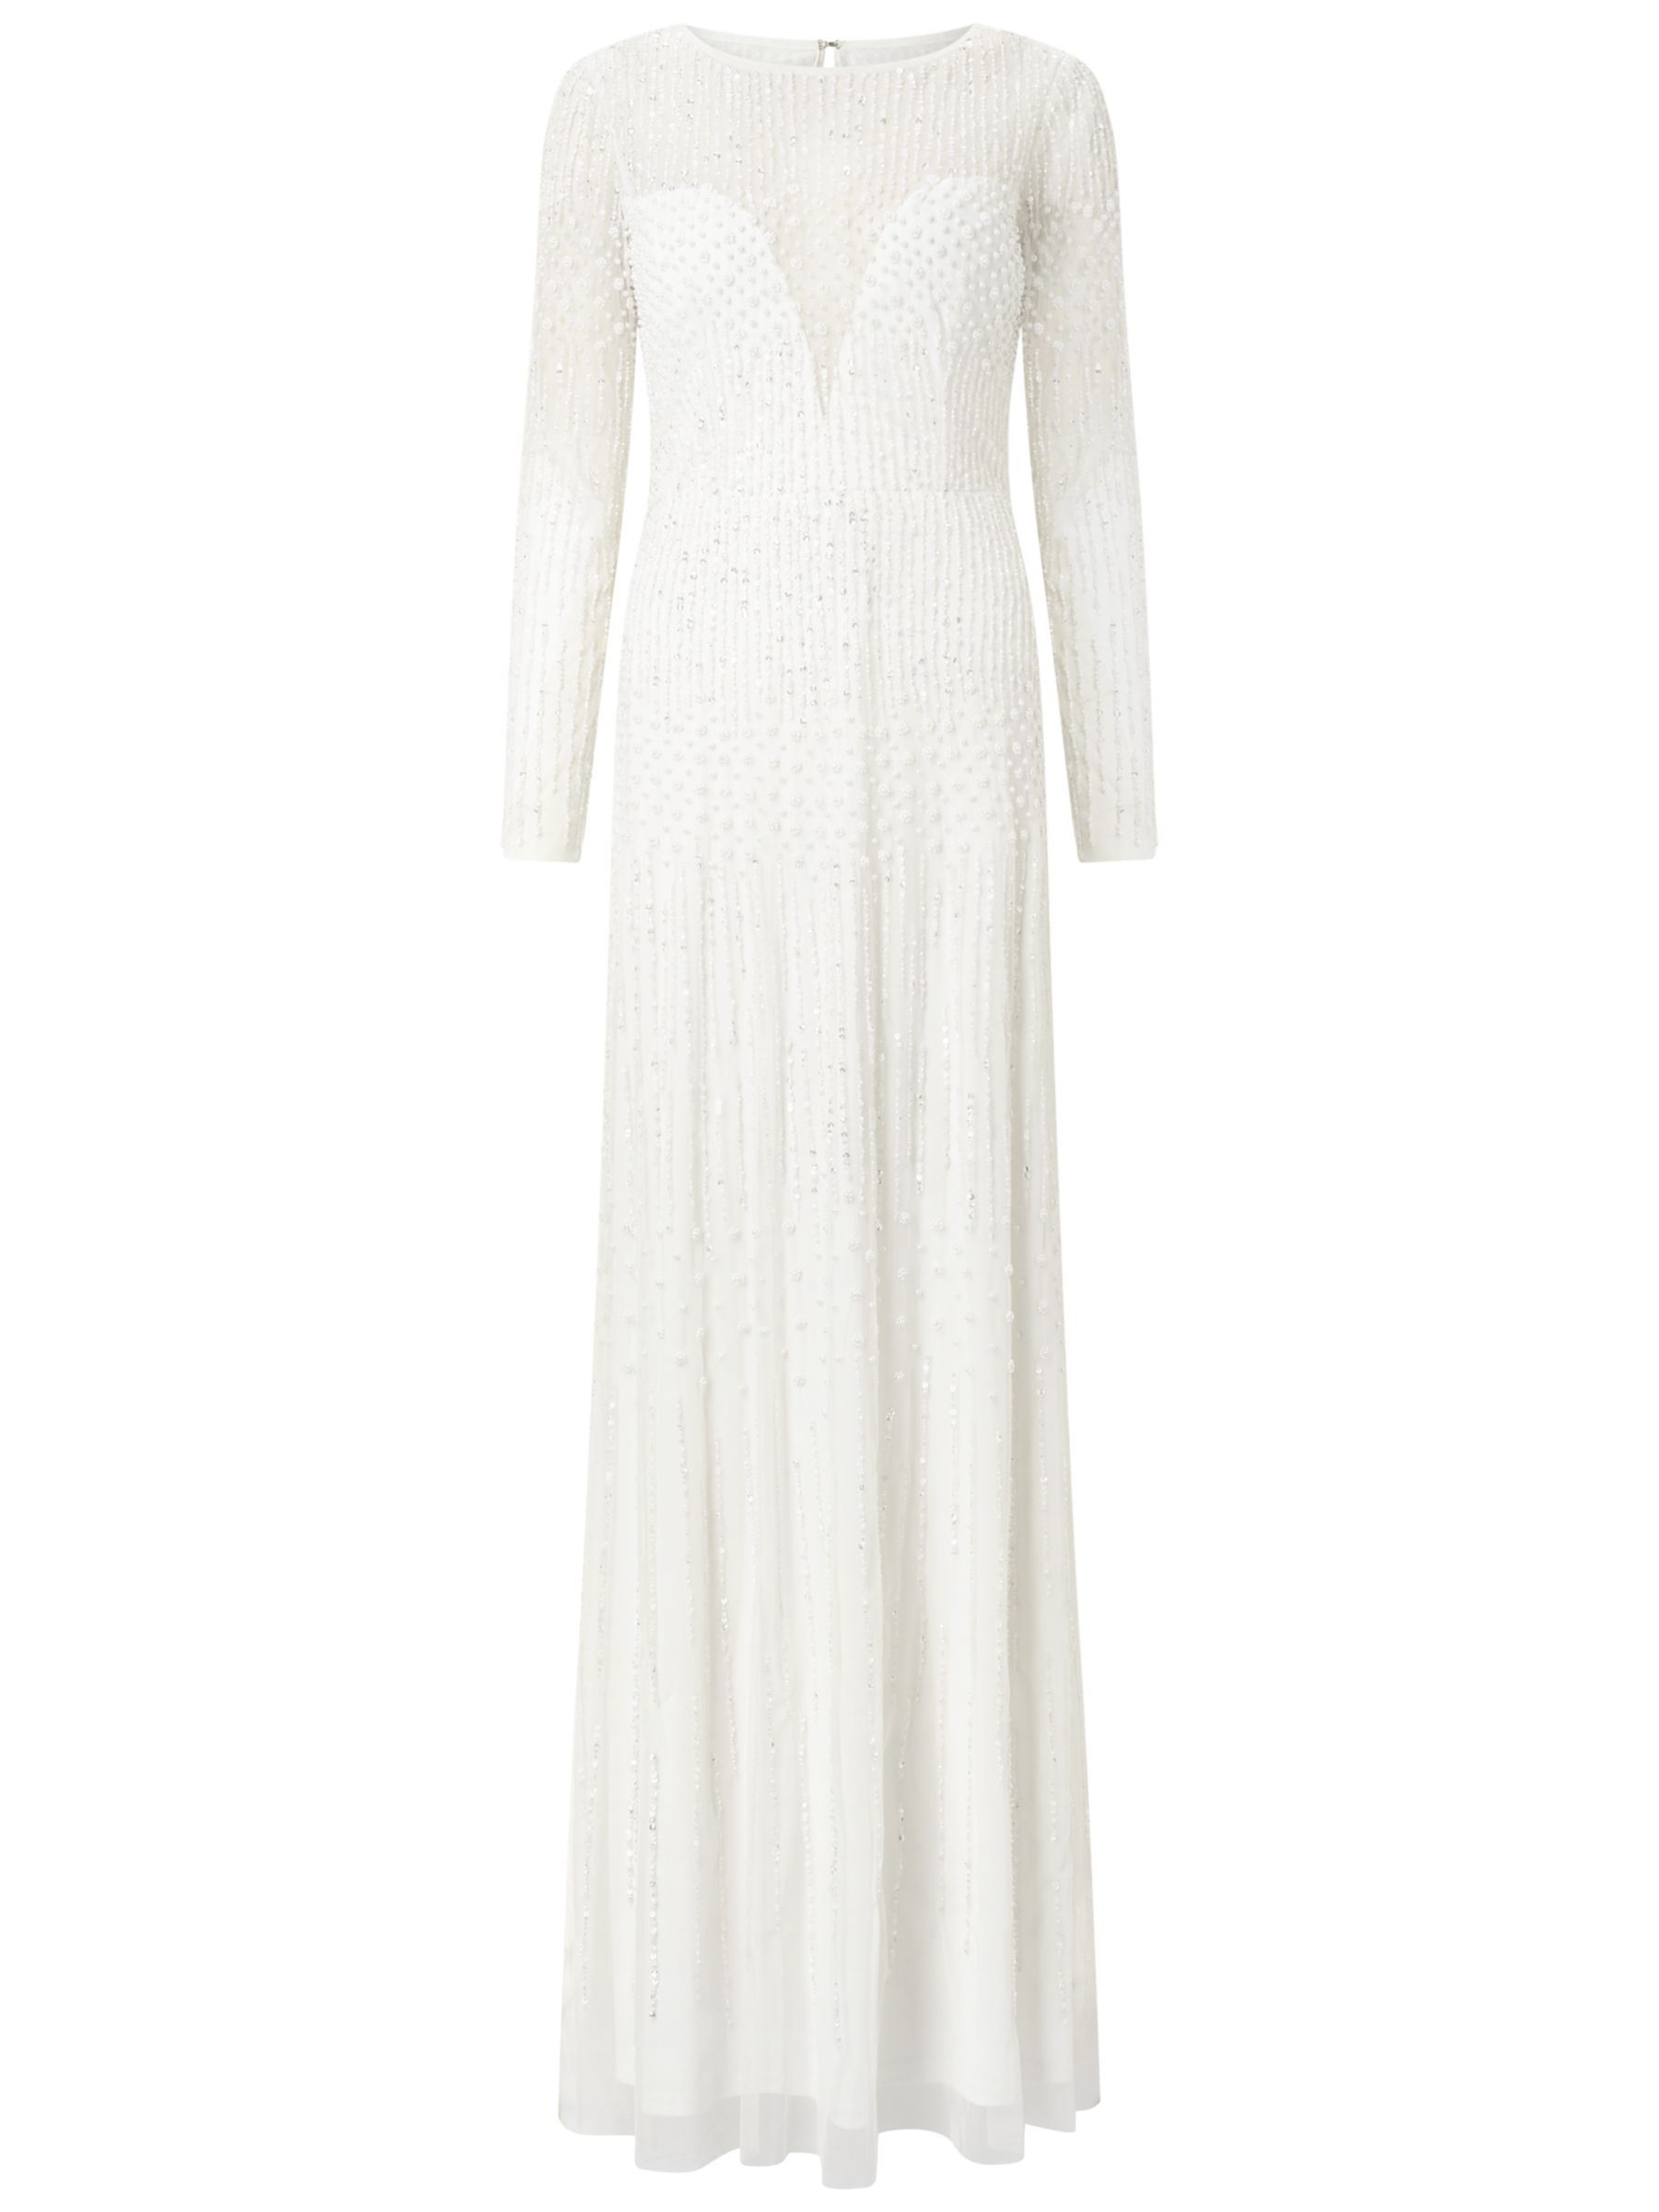 Adrianna Papell Long Sleeve Beaded Gown, Ivory